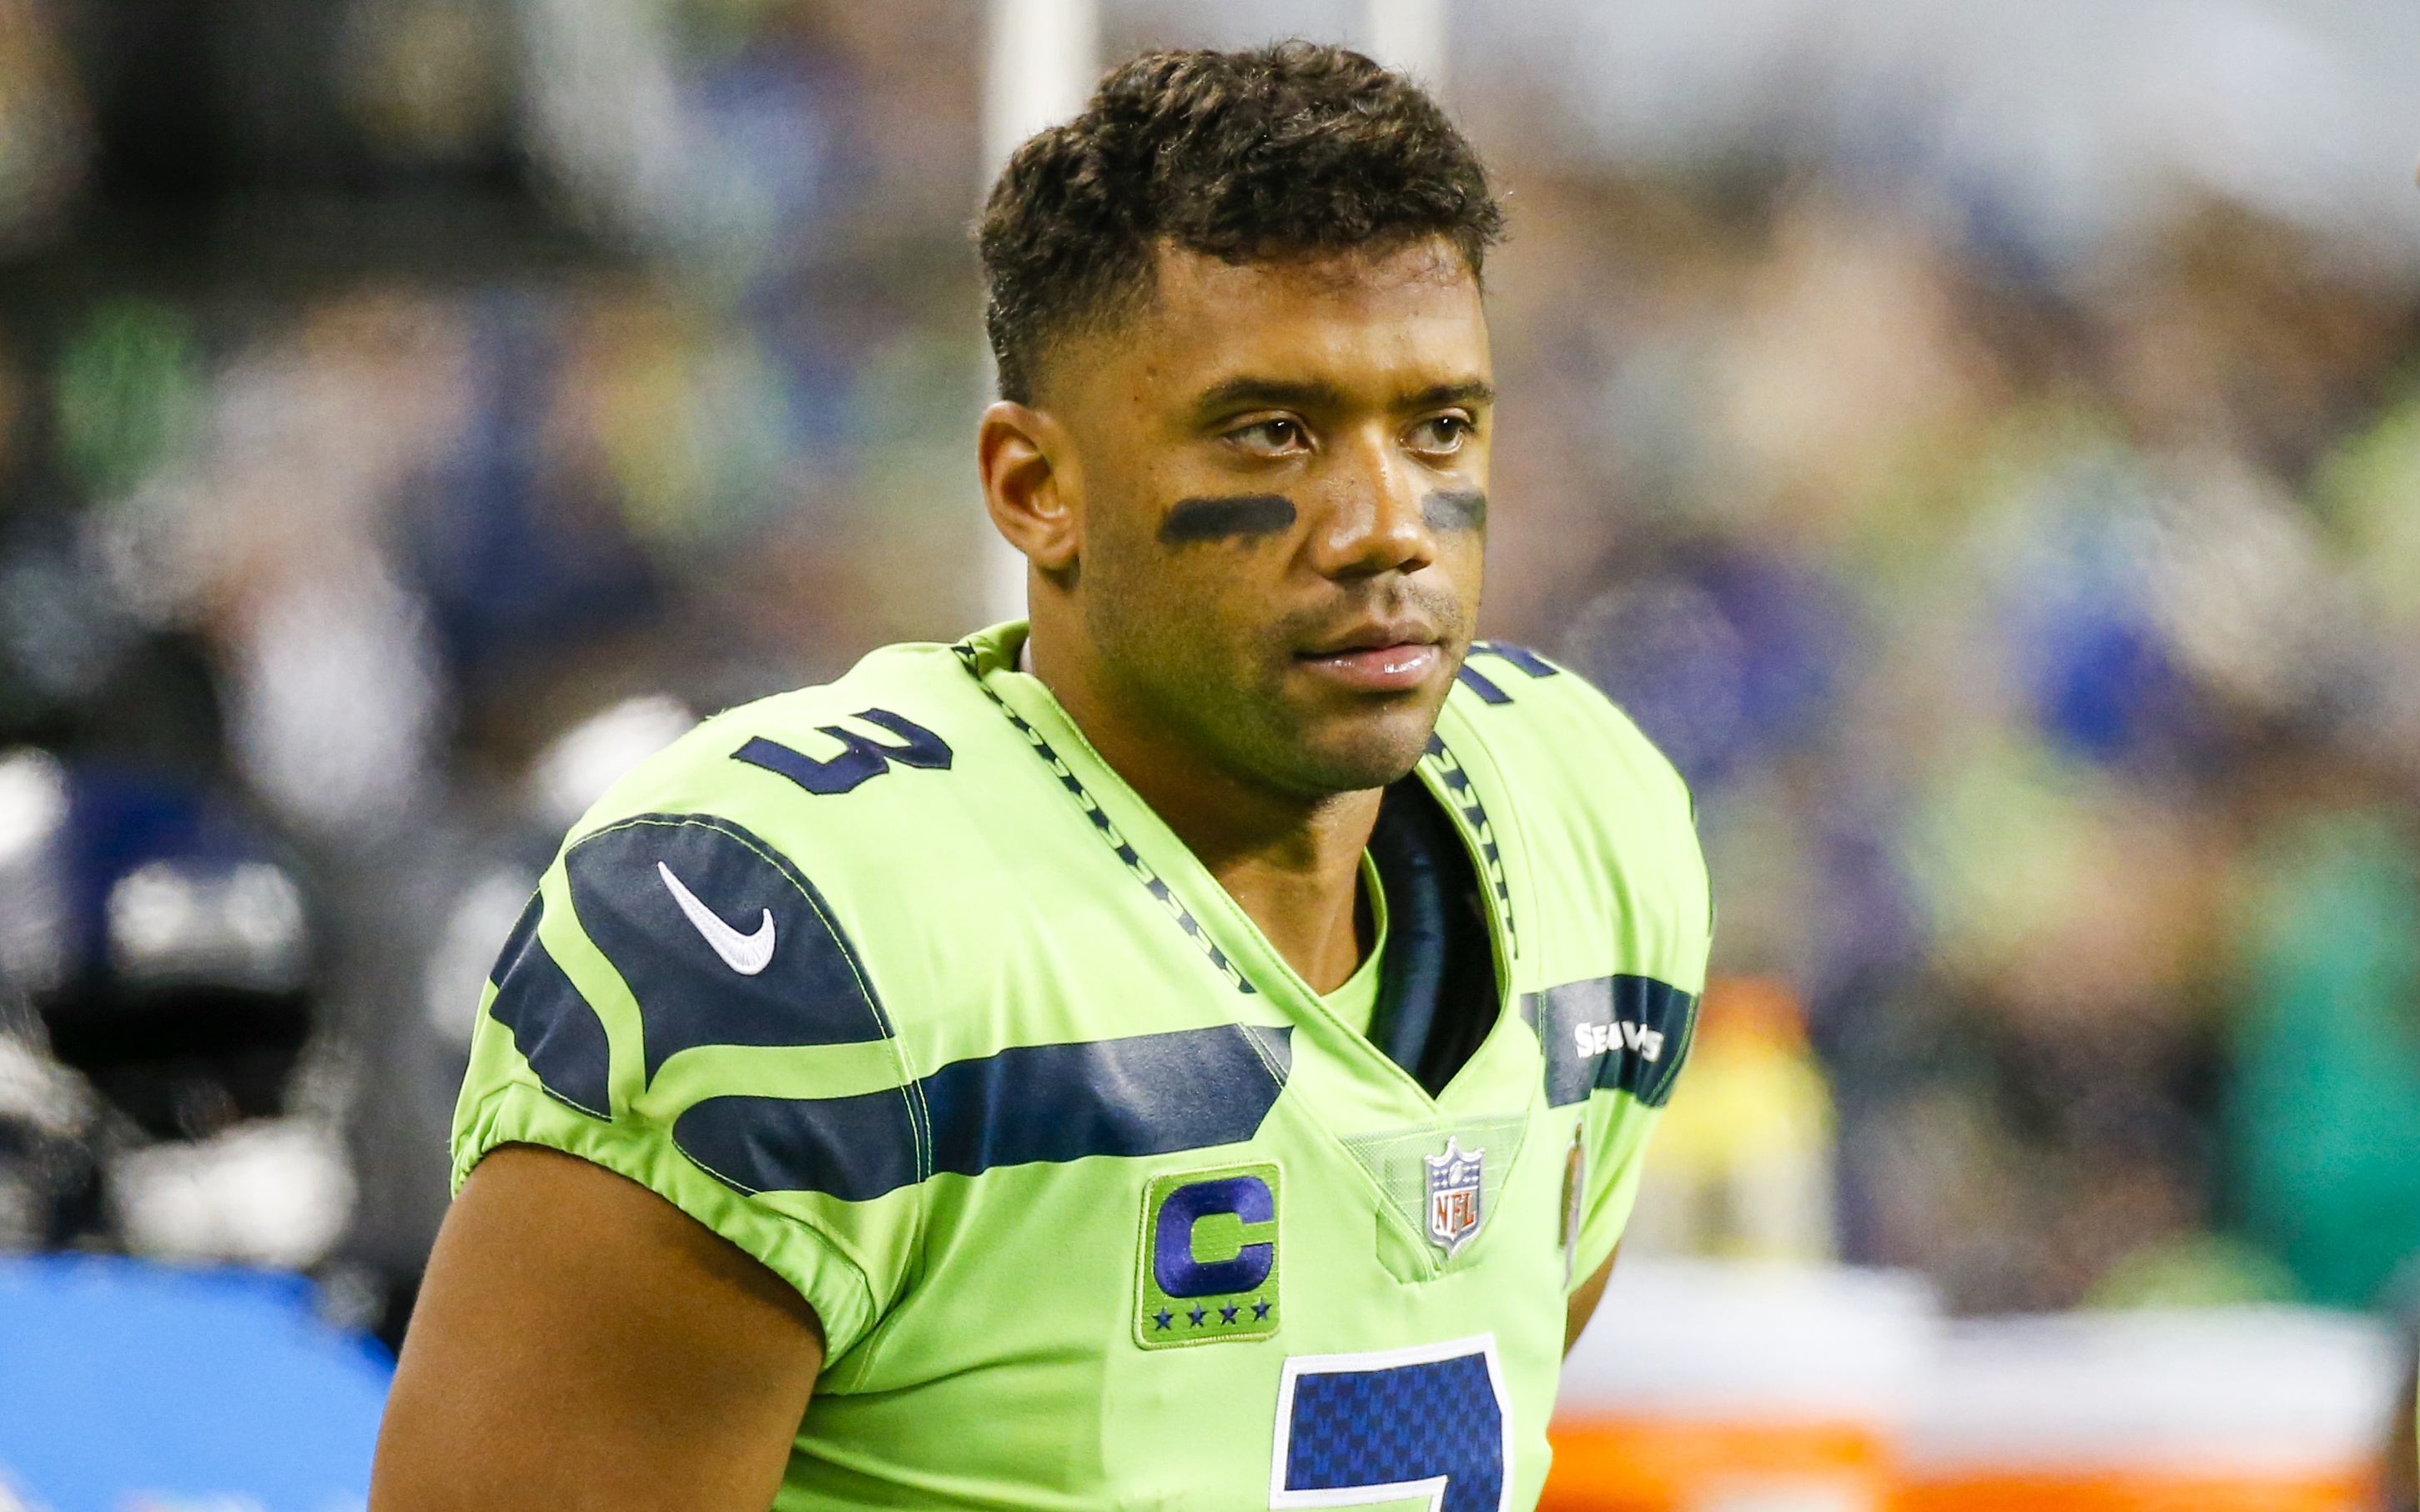 Russell Wilson in October. Credit: Joe Nicholson, USA TODAY Sports.